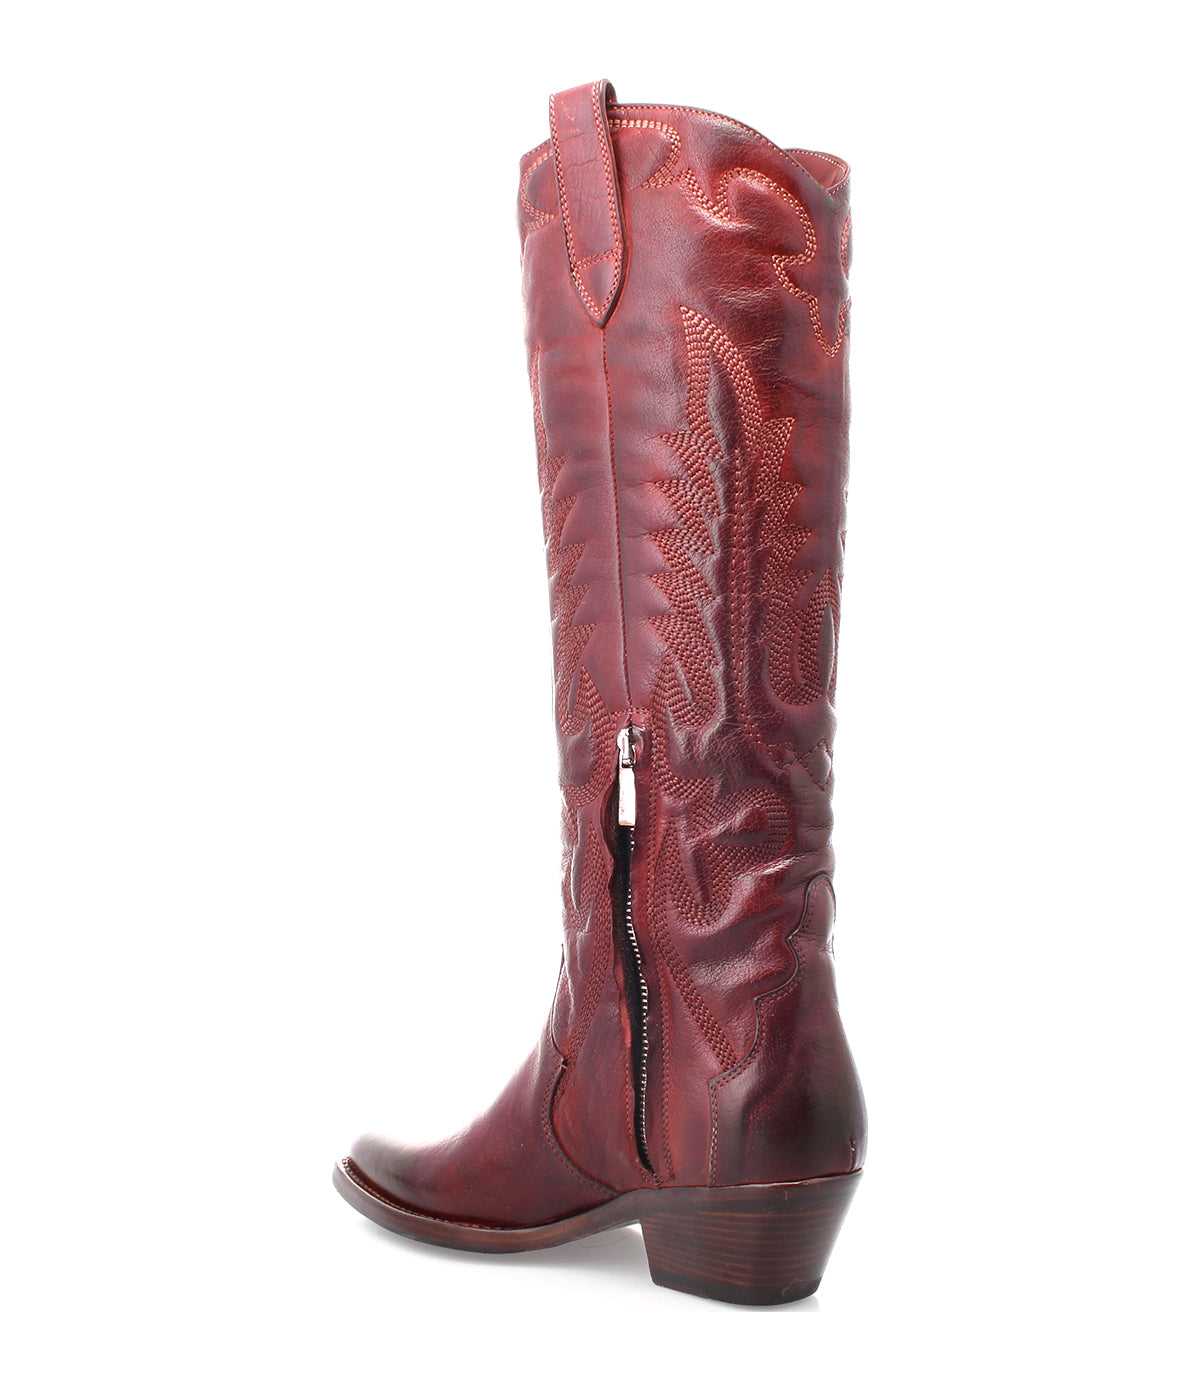 A Finito women's leather cowboy boot in red by Bed Stu.